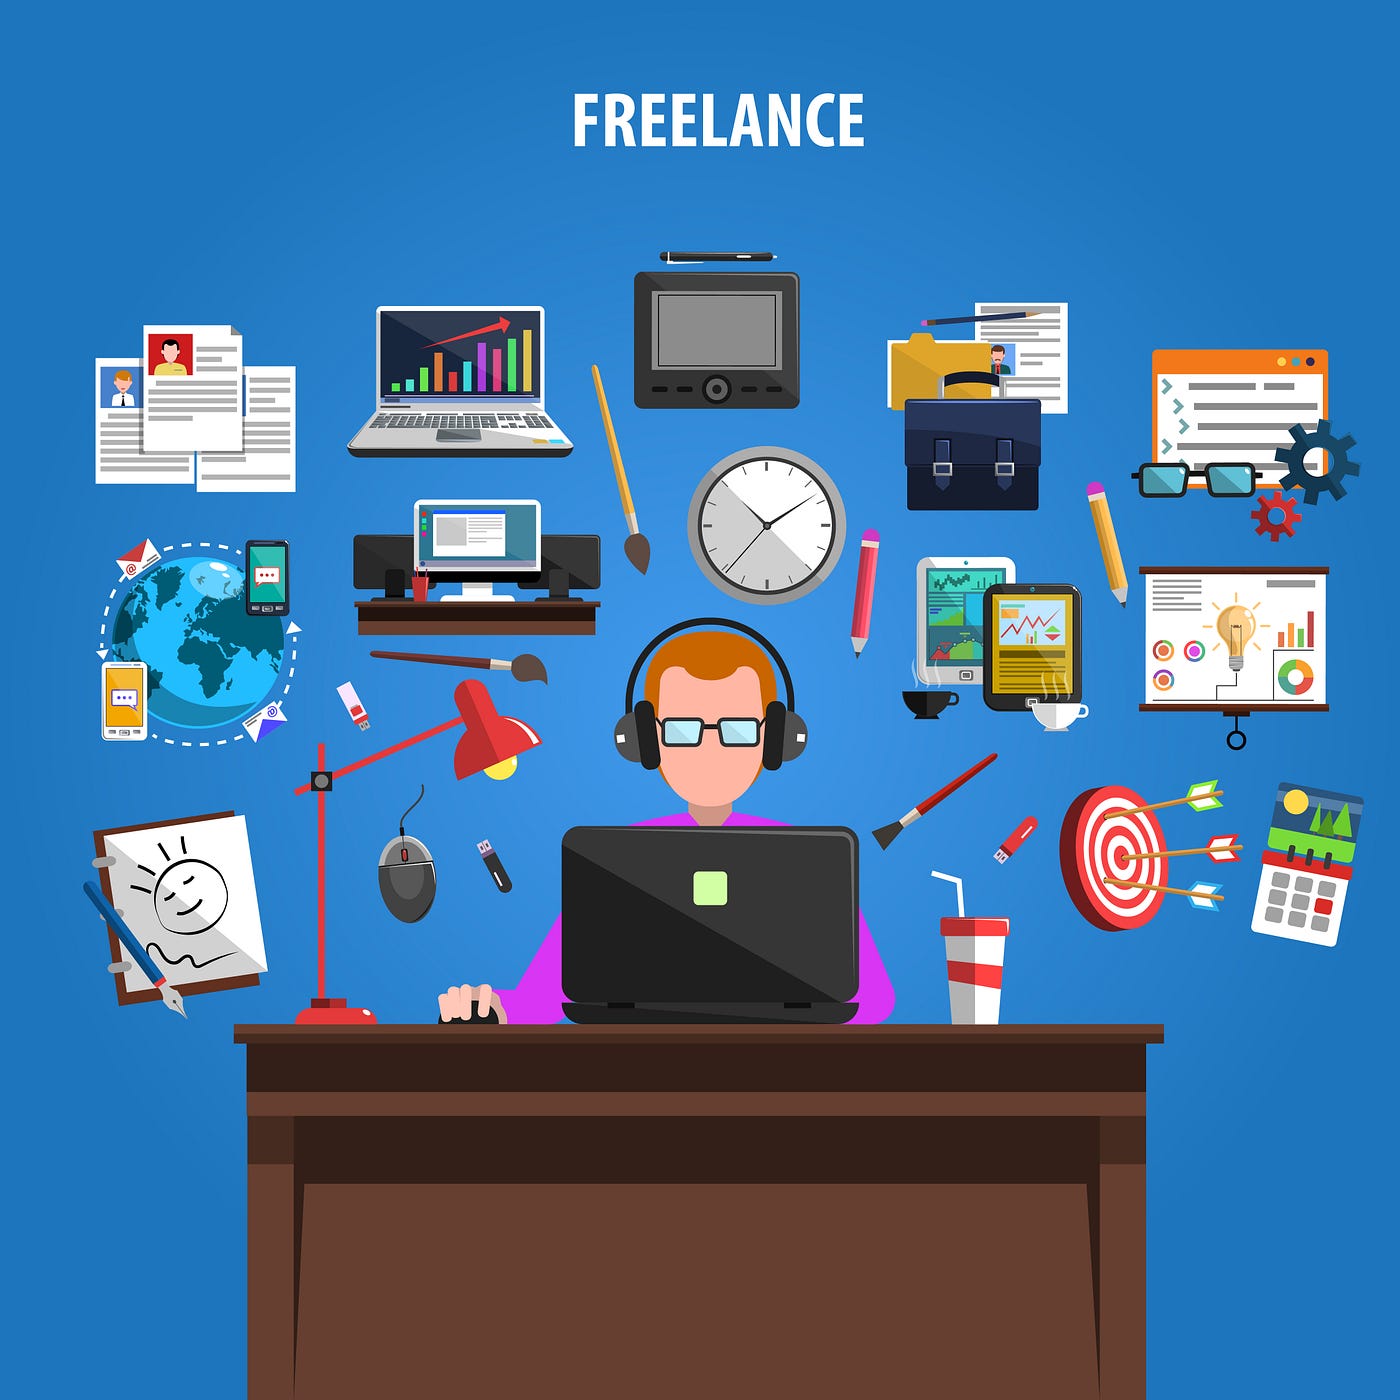 Want to freelance but not sure where to start?